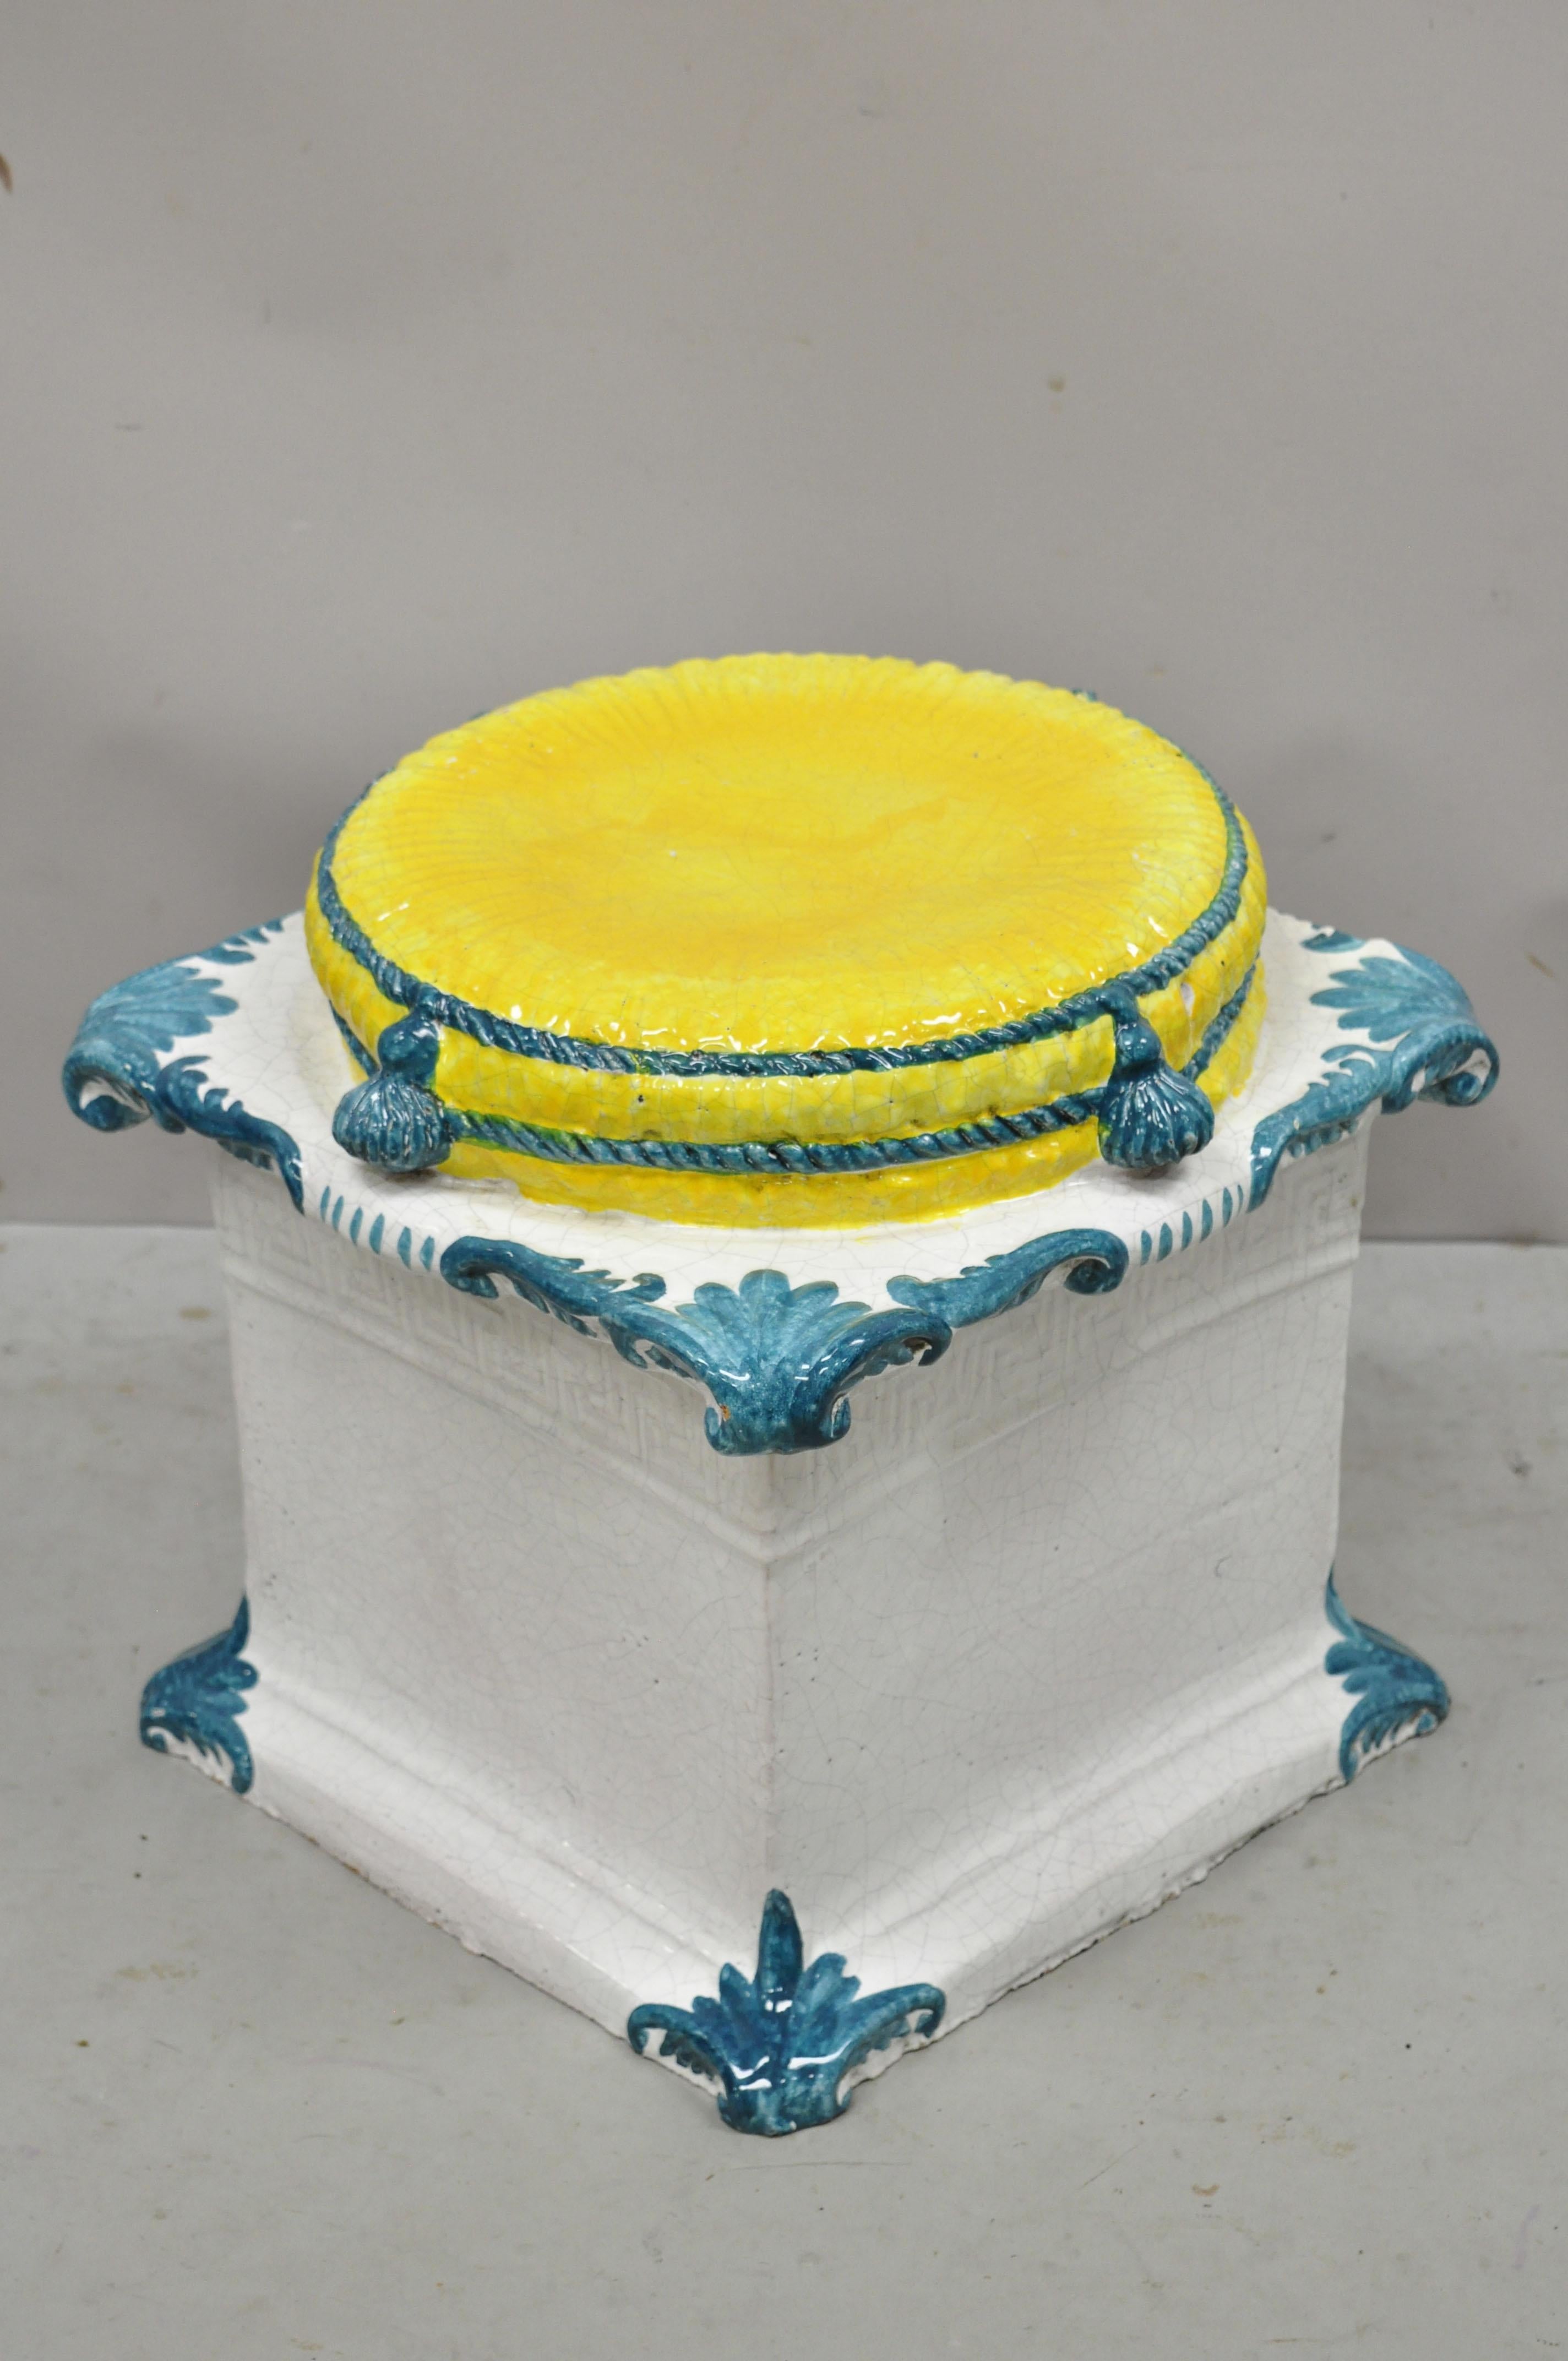 Vintage Italian Regency yellow blue Glazed Terracotta Greek Key Garden seat side table. Item features wonderful original paint, yellow pillow, blue tassels, Greek key design to exterior, hand crafted of terracotta, very nice antique item, quality